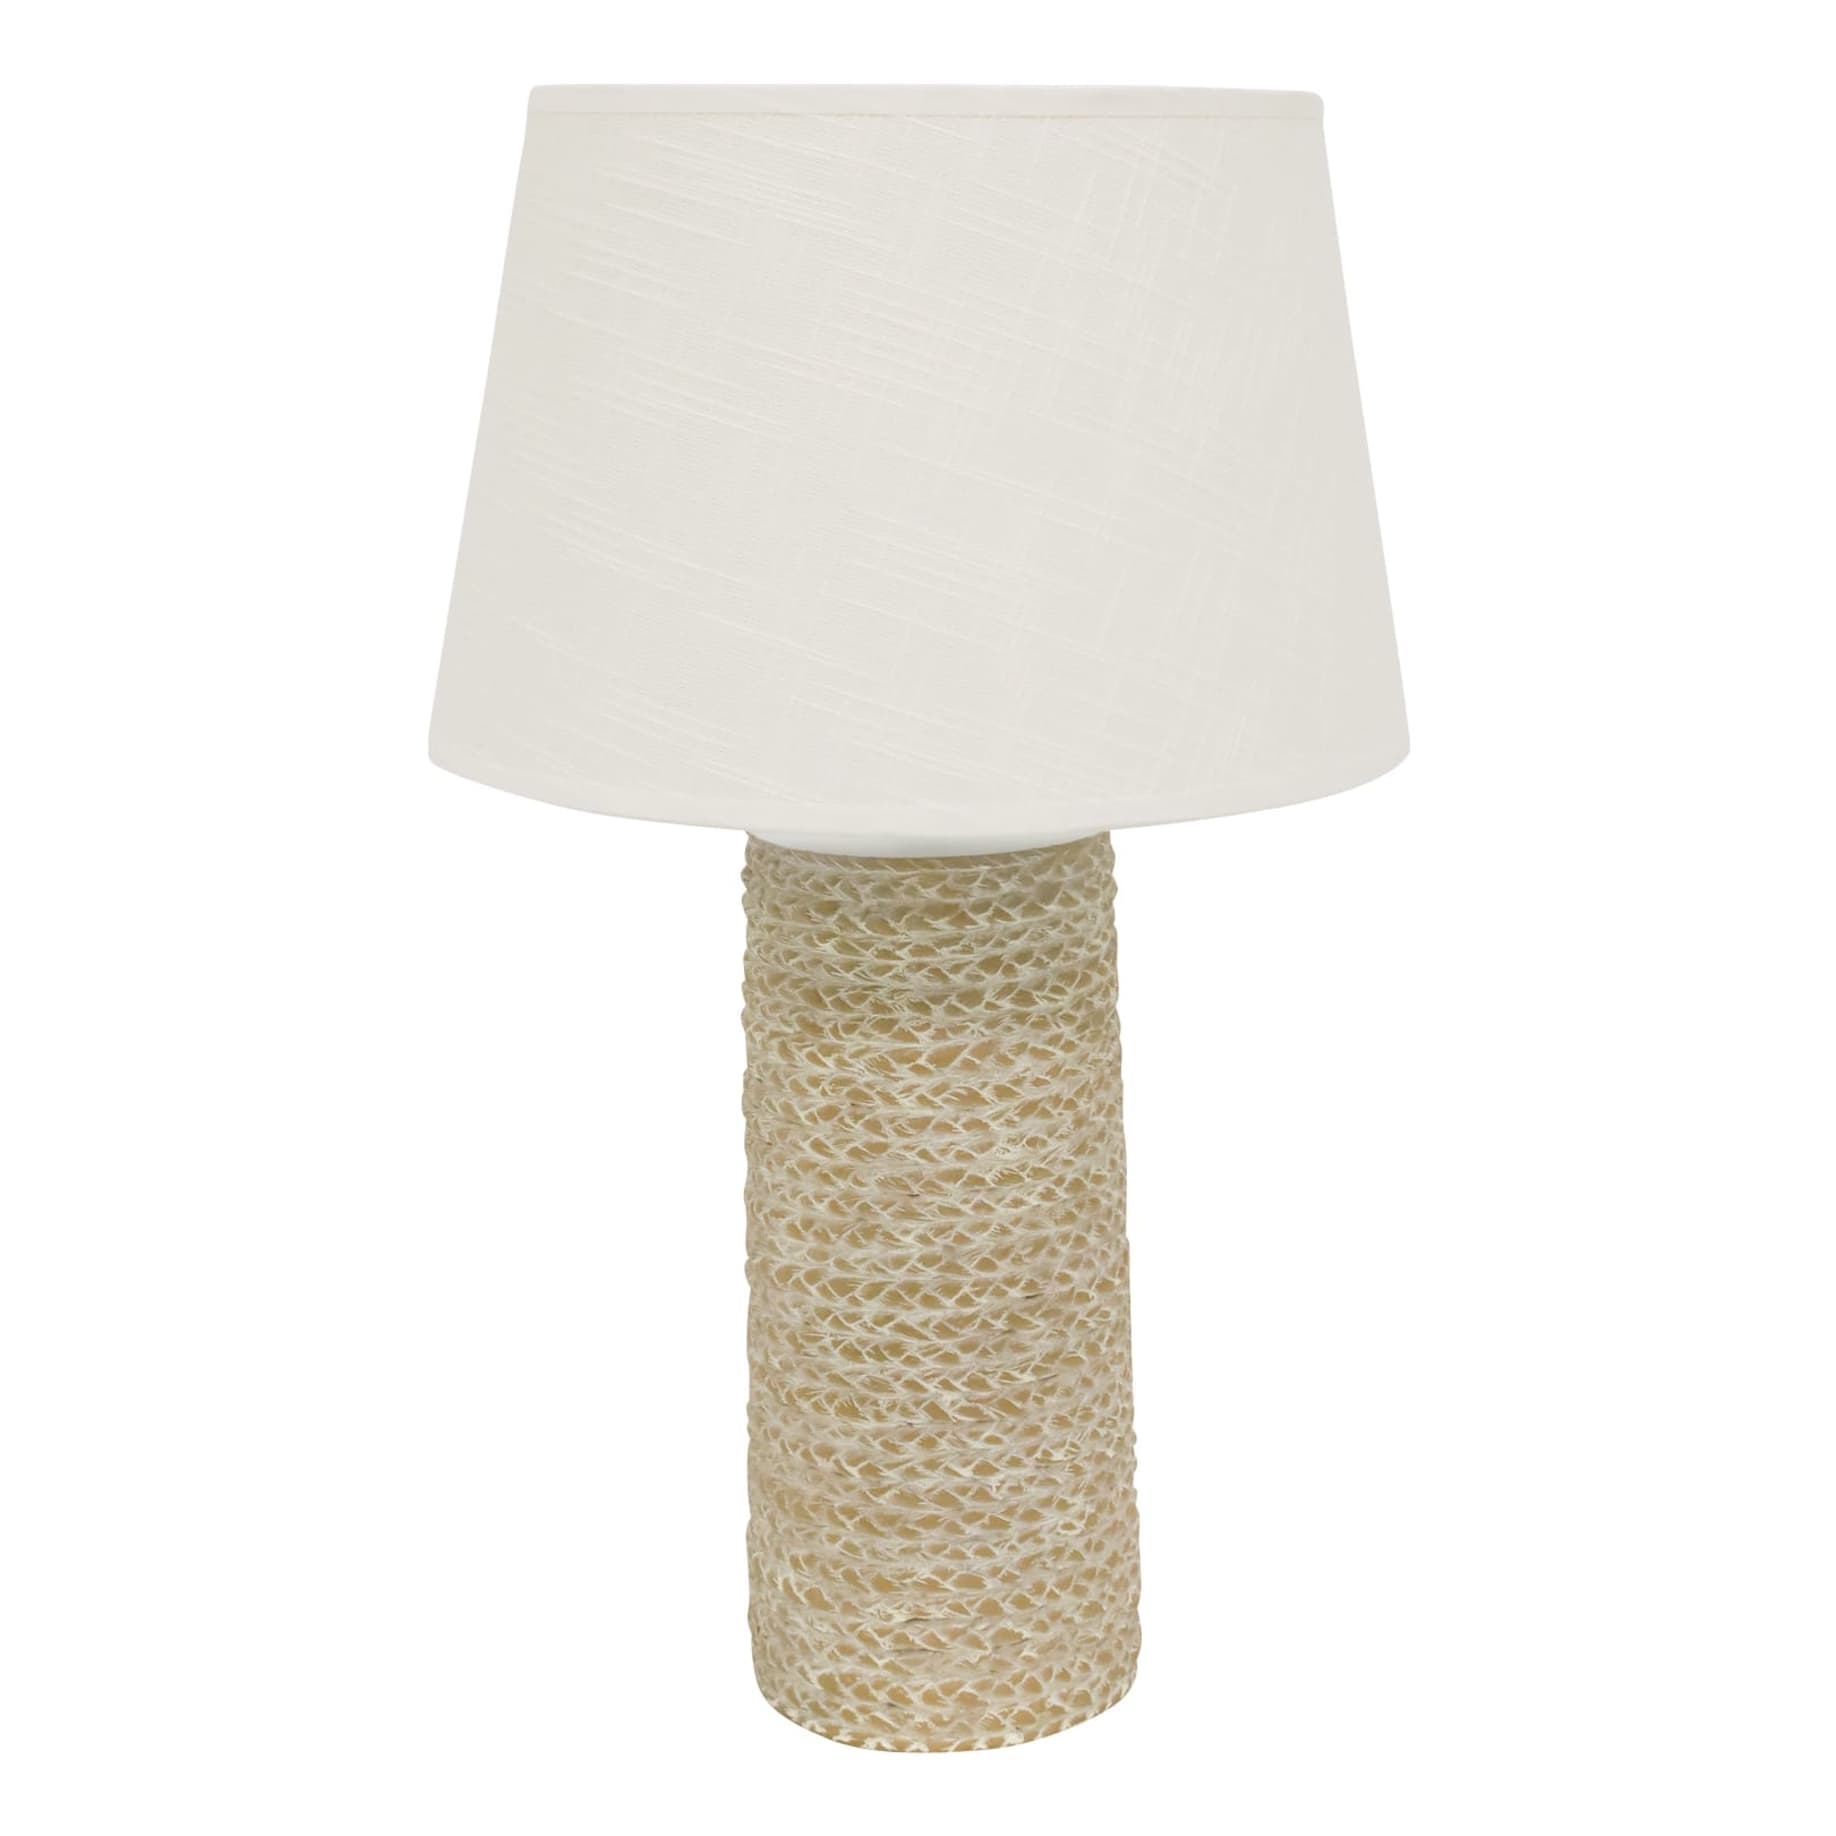 Woven Lamp 16x54cm in Distressed White